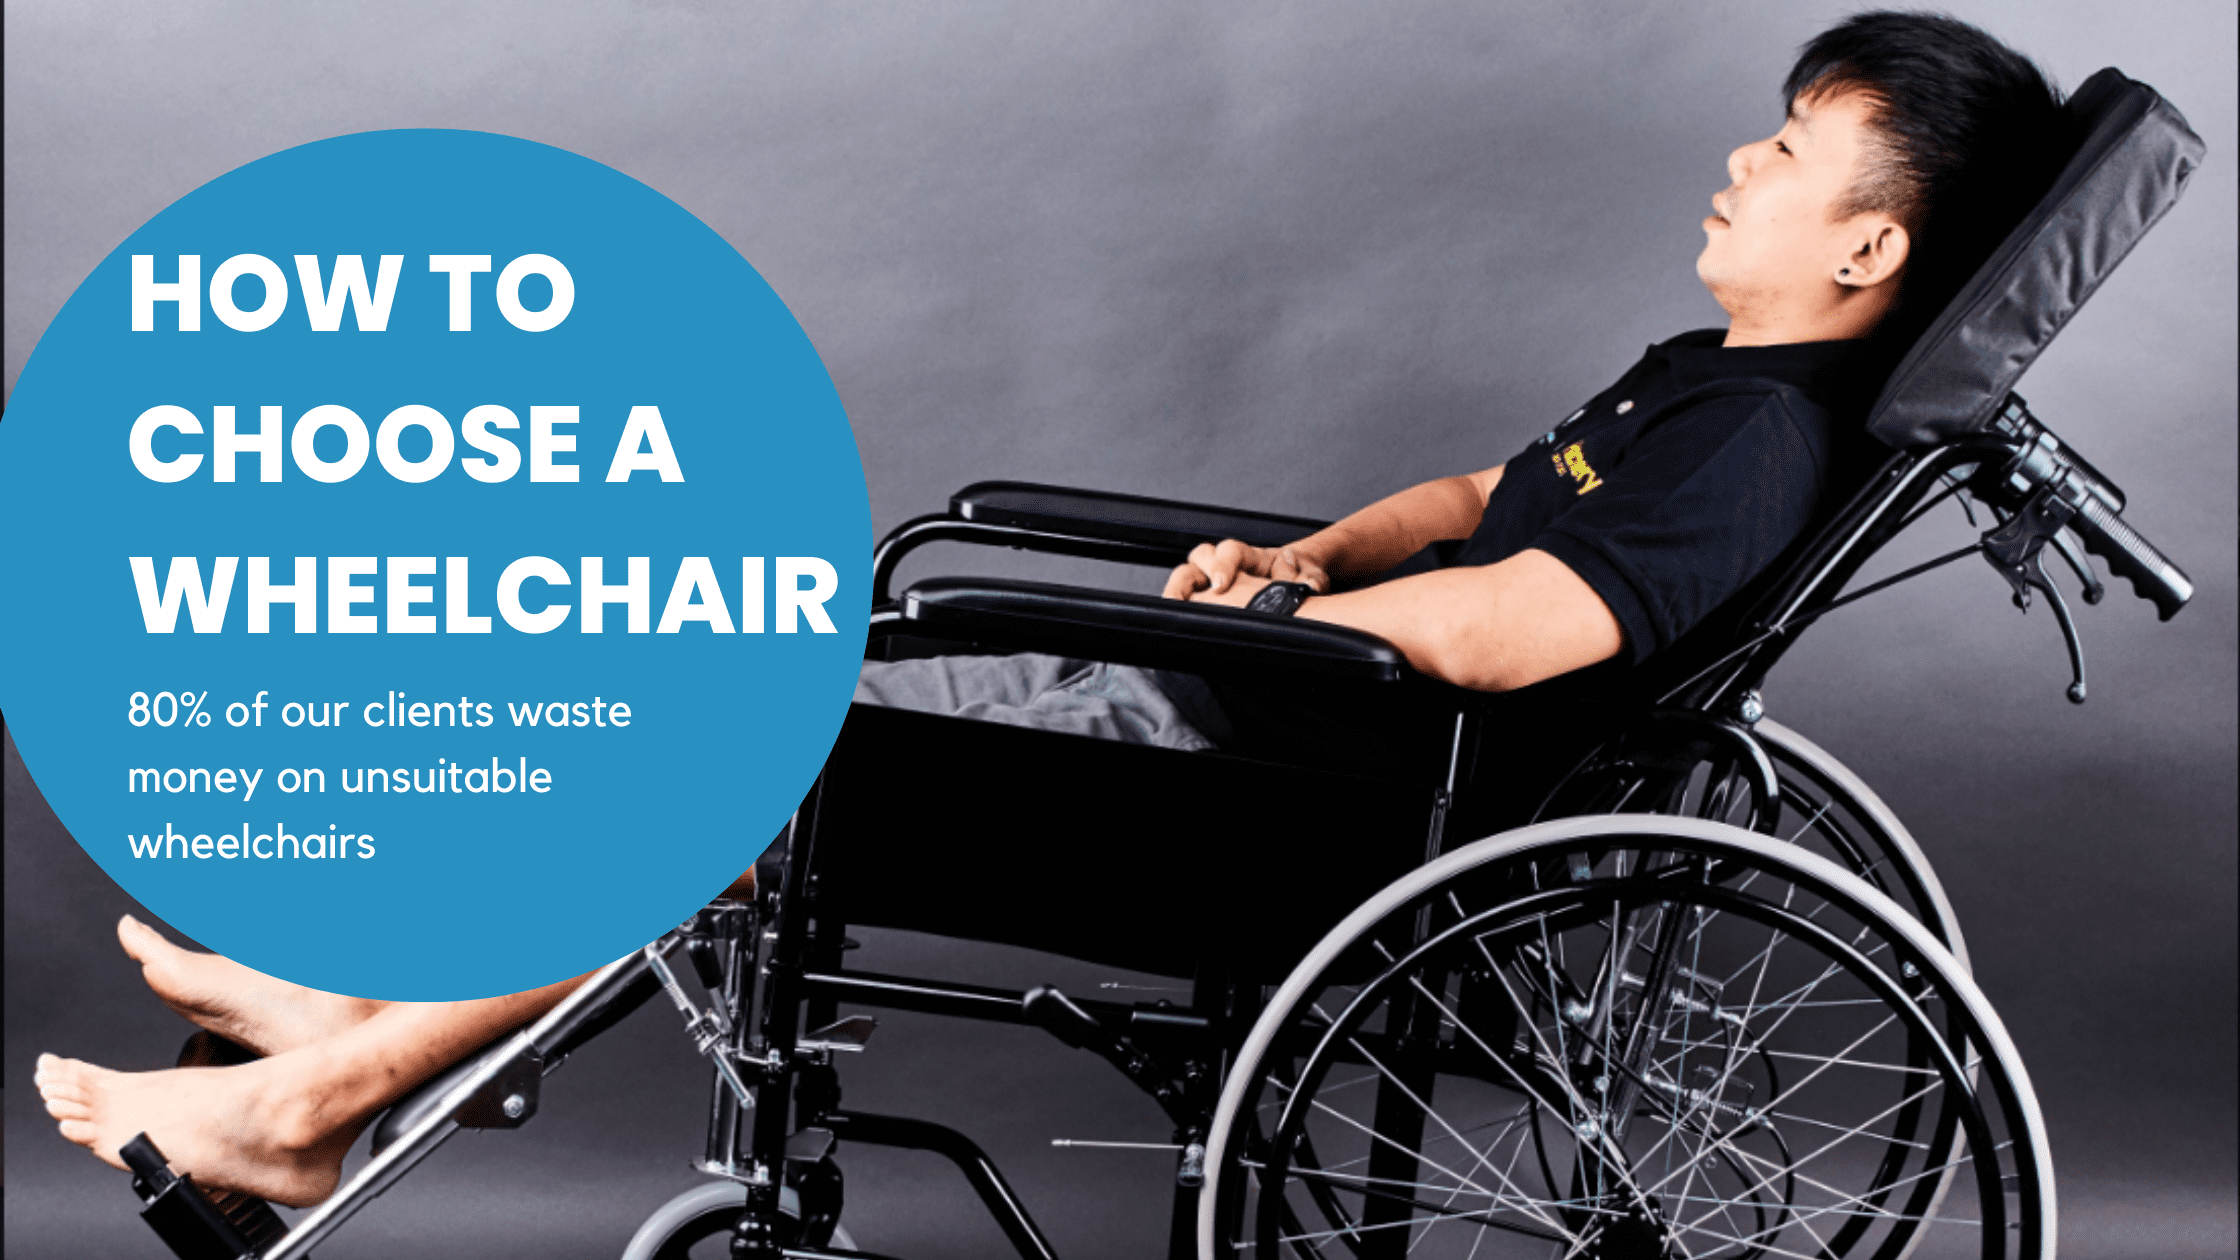 How to choose a wheelchair blog banner